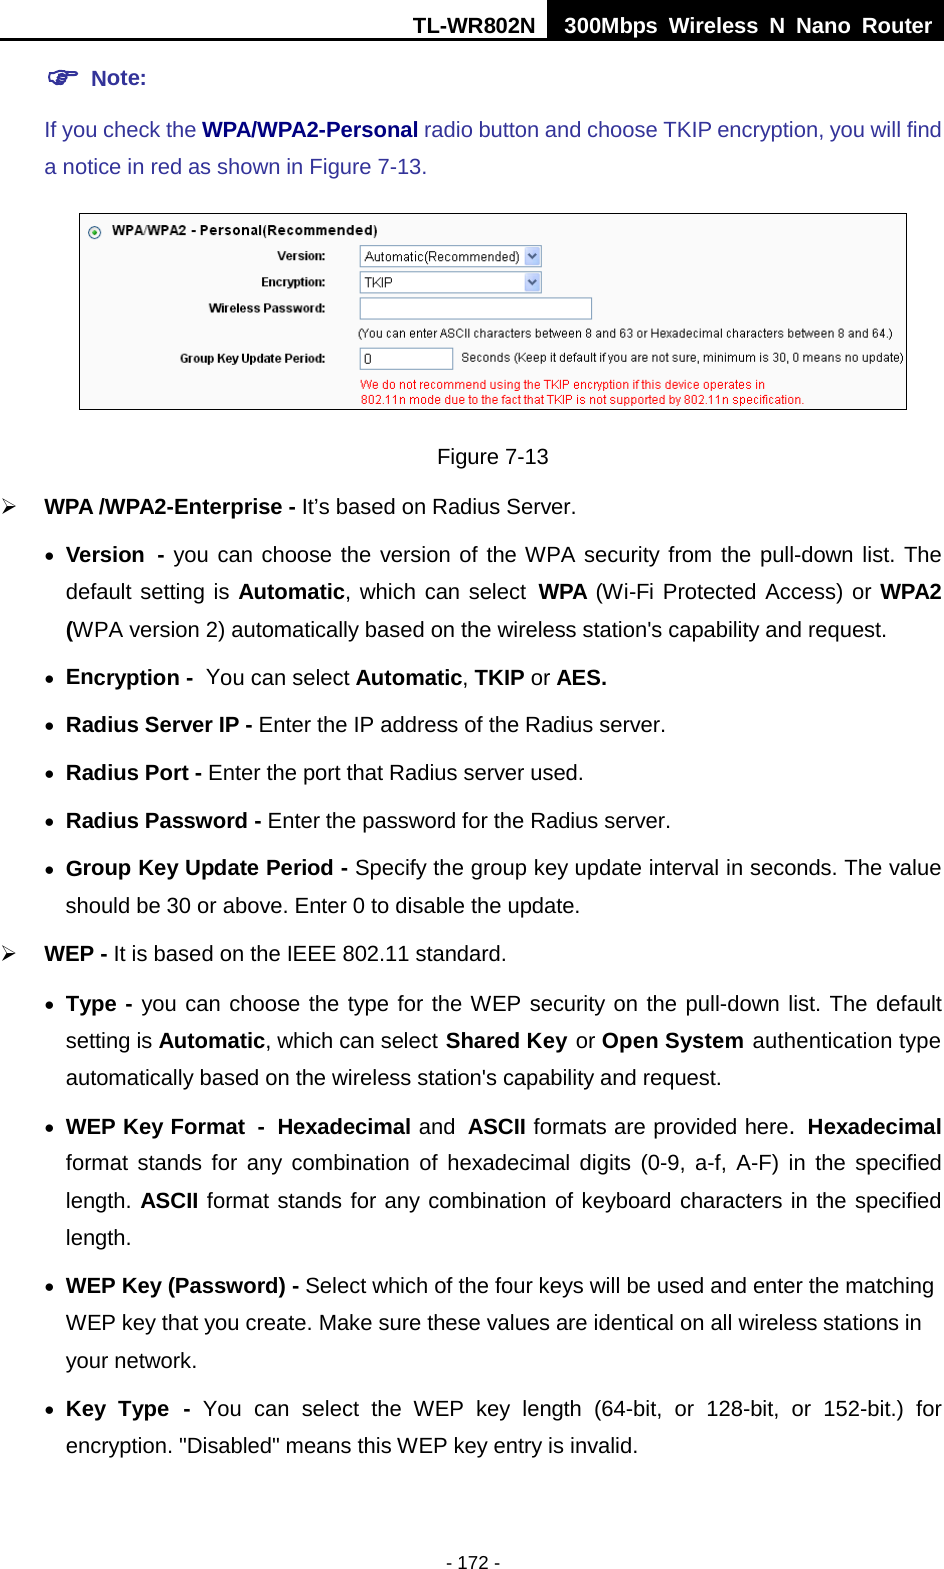 TL-WR802N  300Mbps Wireless N Nano Router   Note:   If you check the WPA/WPA2-Personal radio button and choose TKIP encryption, you will find a notice in red as shown in Figure 7-13.  Figure 7-13  WPA /WPA2-Enterprise - It’s based on Radius Server. • Version - you can choose the version of the WPA security from the pull-down list. The default setting is Automatic, which can select WPA (Wi-Fi Protected Access) or WPA2 (WPA version 2) automatically based on the wireless station&apos;s capability and request. • Encryption - You can select Automatic, TKIP or AES. • Radius Server IP - Enter the IP address of the Radius server. • Radius Port - Enter the port that Radius server used. • Radius Password - Enter the password for the Radius server. • Group Key Update Period - Specify the group key update interval in seconds. The value should be 30 or above. Enter 0 to disable the update.  WEP - It is based on the IEEE 802.11 standard.   • Type - you can choose the type for the WEP security on the pull-down list. The default setting is Automatic, which can select Shared Key or Open System authentication type automatically based on the wireless station&apos;s capability and request. • WEP Key Format - Hexadecimal and ASCII formats are provided here. Hexadecimal format stands for any combination of hexadecimal digits (0-9, a-f, A-F) in the specified length. ASCII format stands for any combination of keyboard characters in the specified length.   • WEP Key (Password) - Select which of the four keys will be used and enter the matching WEP key that you create. Make sure these values are identical on all wireless stations in your network.   • Key Type - You can select the WEP key length (64-bit, or 128-bit, or 152-bit.) for encryption. &quot;Disabled&quot; means this WEP key entry is invalid. - 172 - 